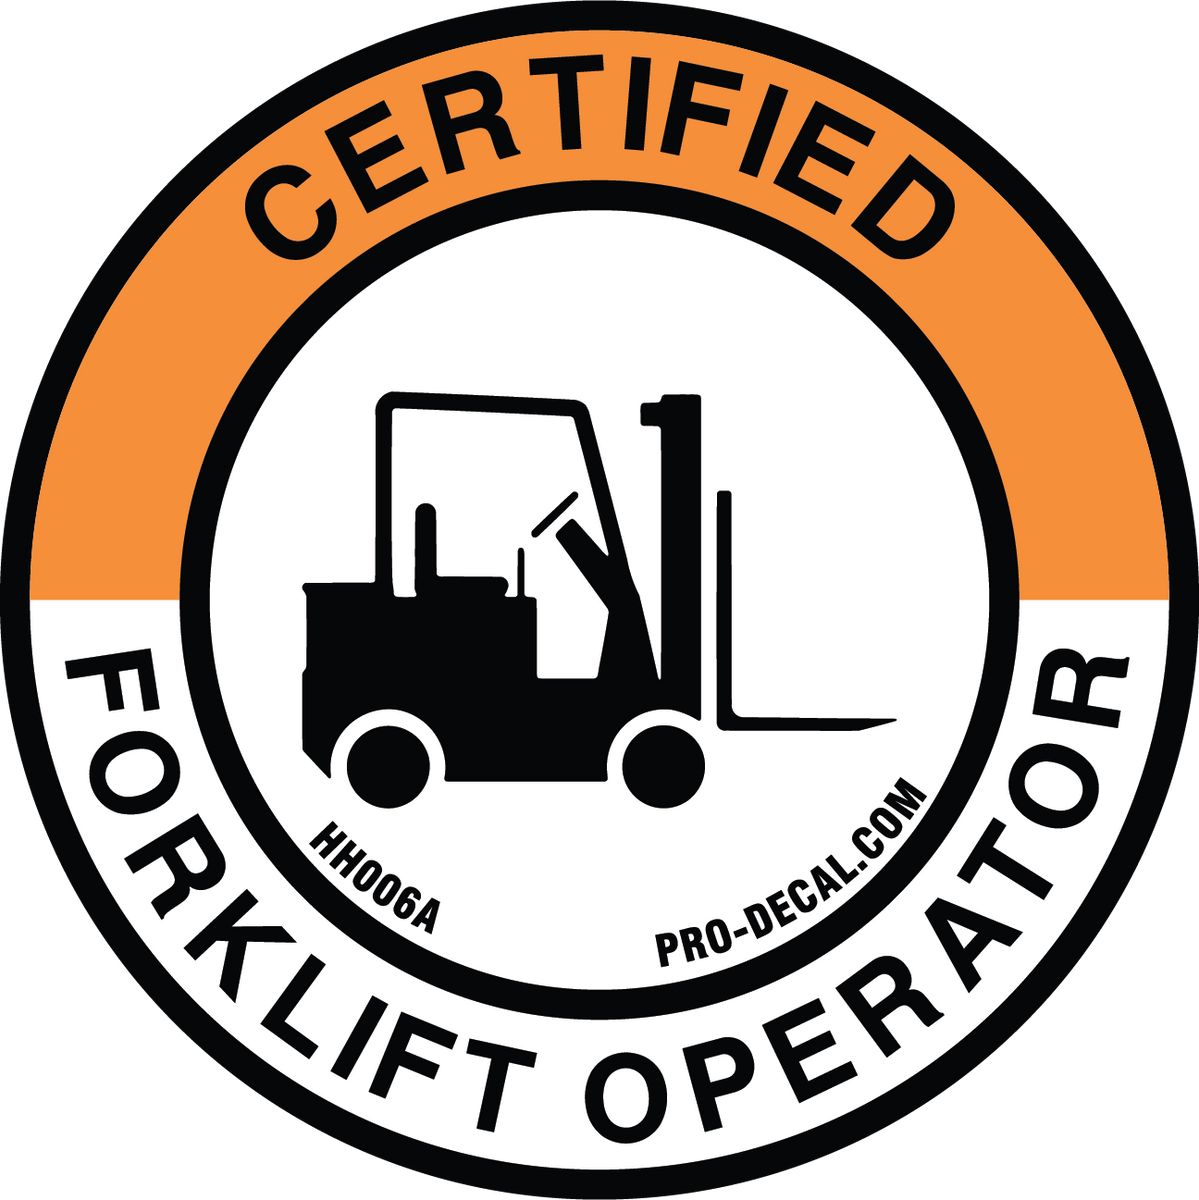 Pro Decal Hard Hat Decals Certified Forklift Operator 2 5 quot x 2 5 quot